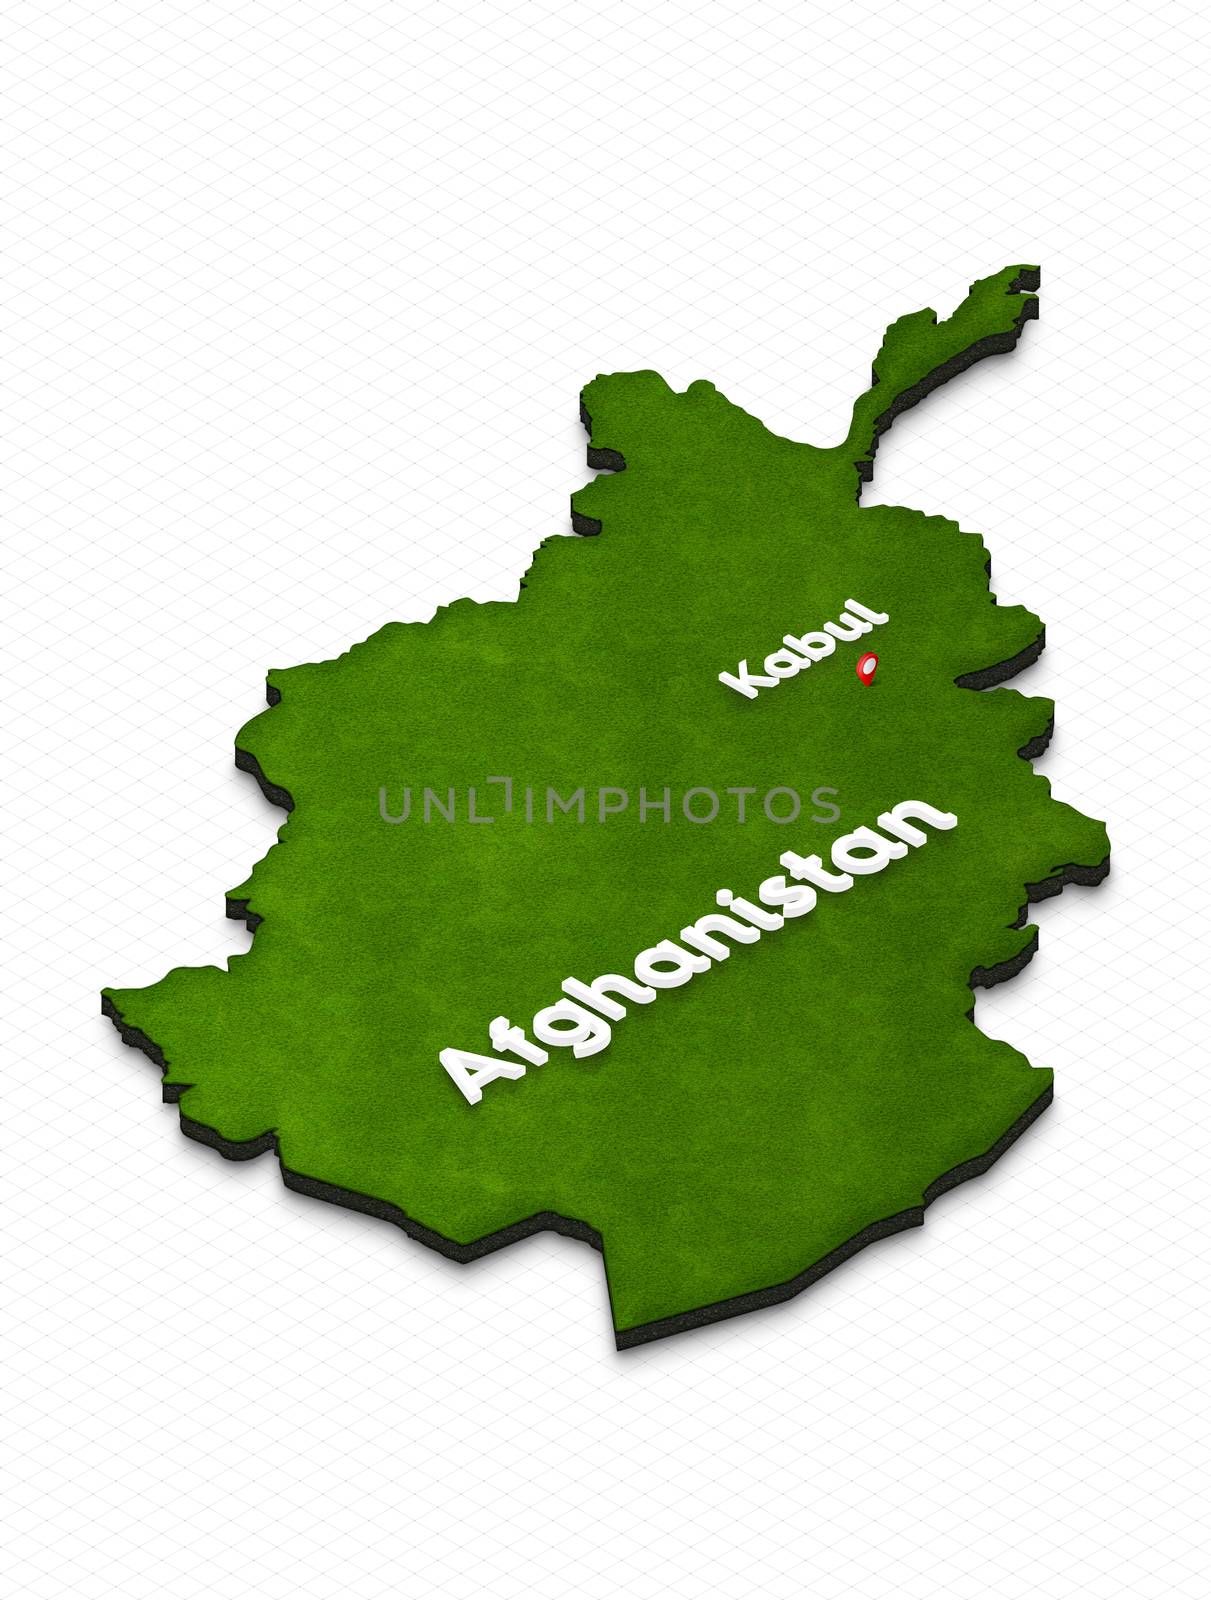 Illustration of a green ground map of Afghanistan on grid background. Right 3D isometric perspective projection with the name of country and capital Kabul.